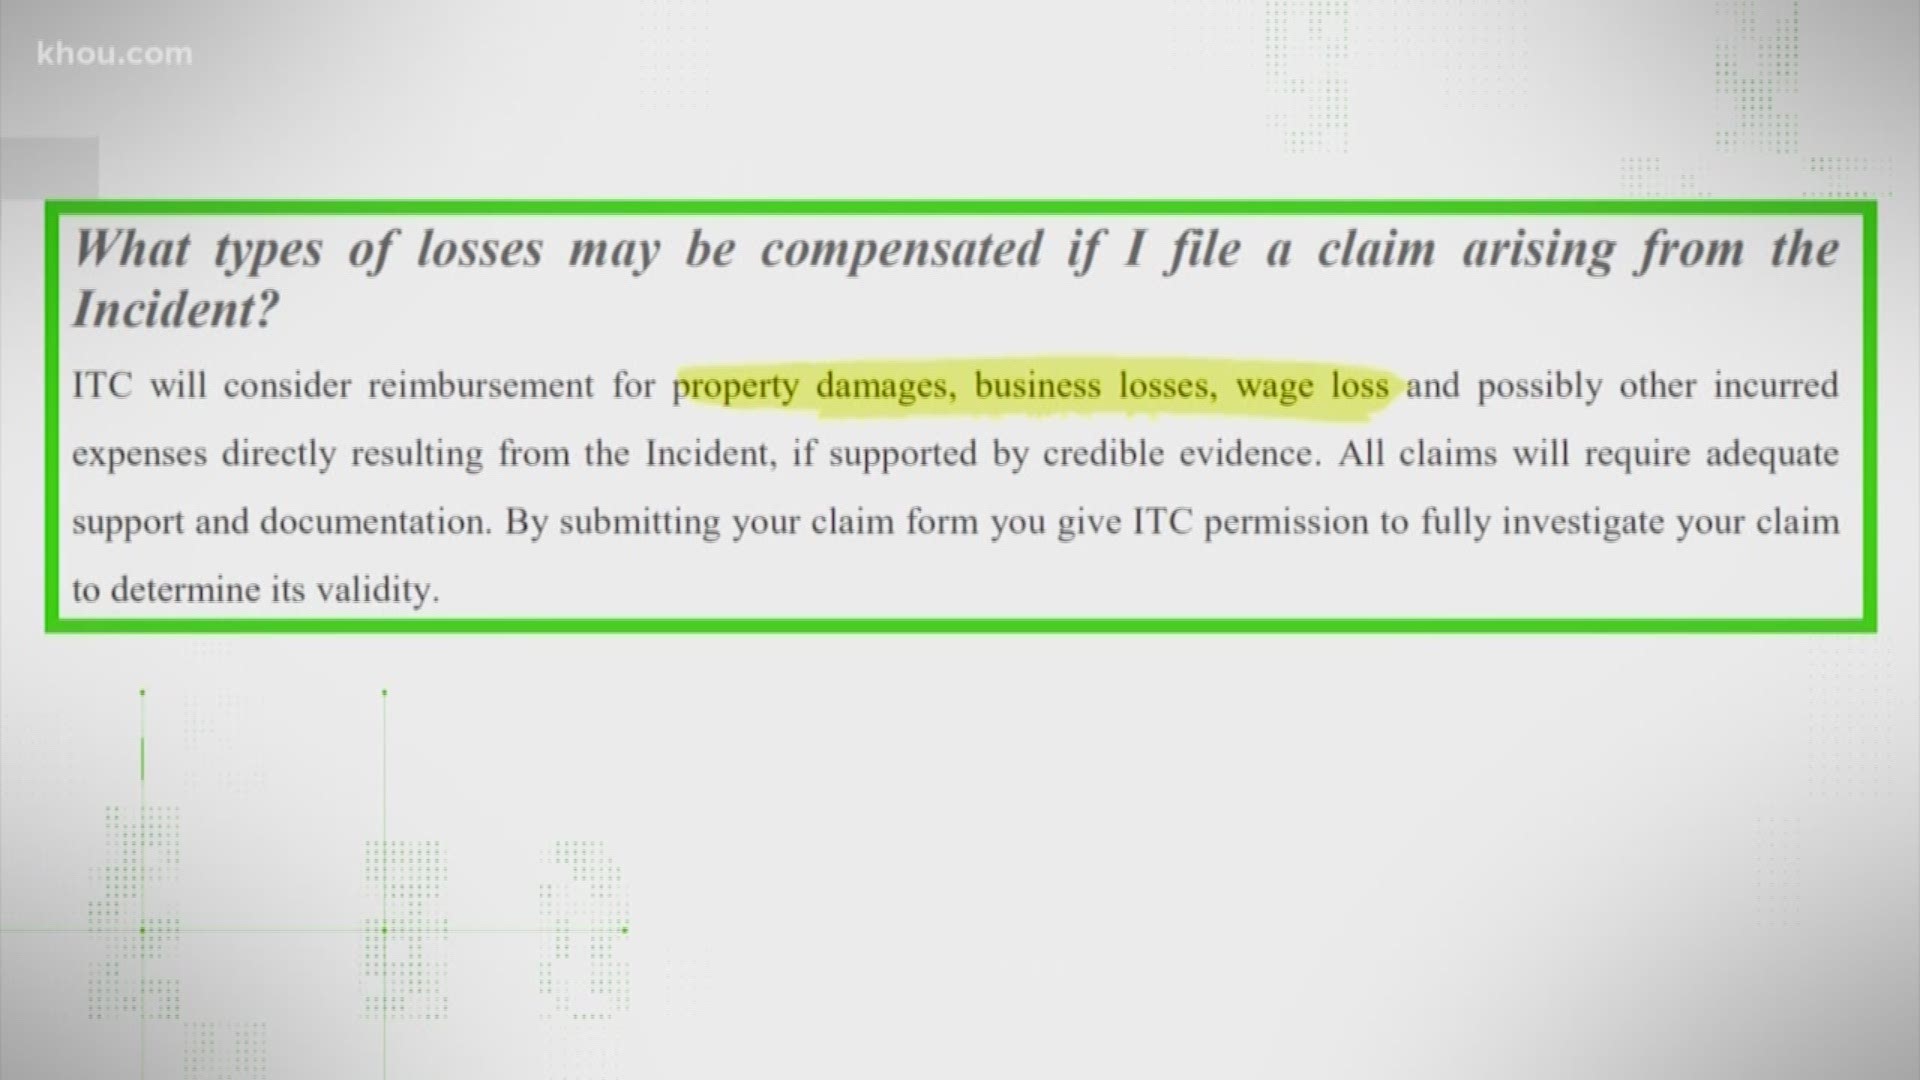 For anyone who's had to go to a doctor because of the ITC chemical tank fire or lost wages, the company is suggesting you submit a claim on its website. But by doing so, are you giving up your rights to sue them later? We verified.